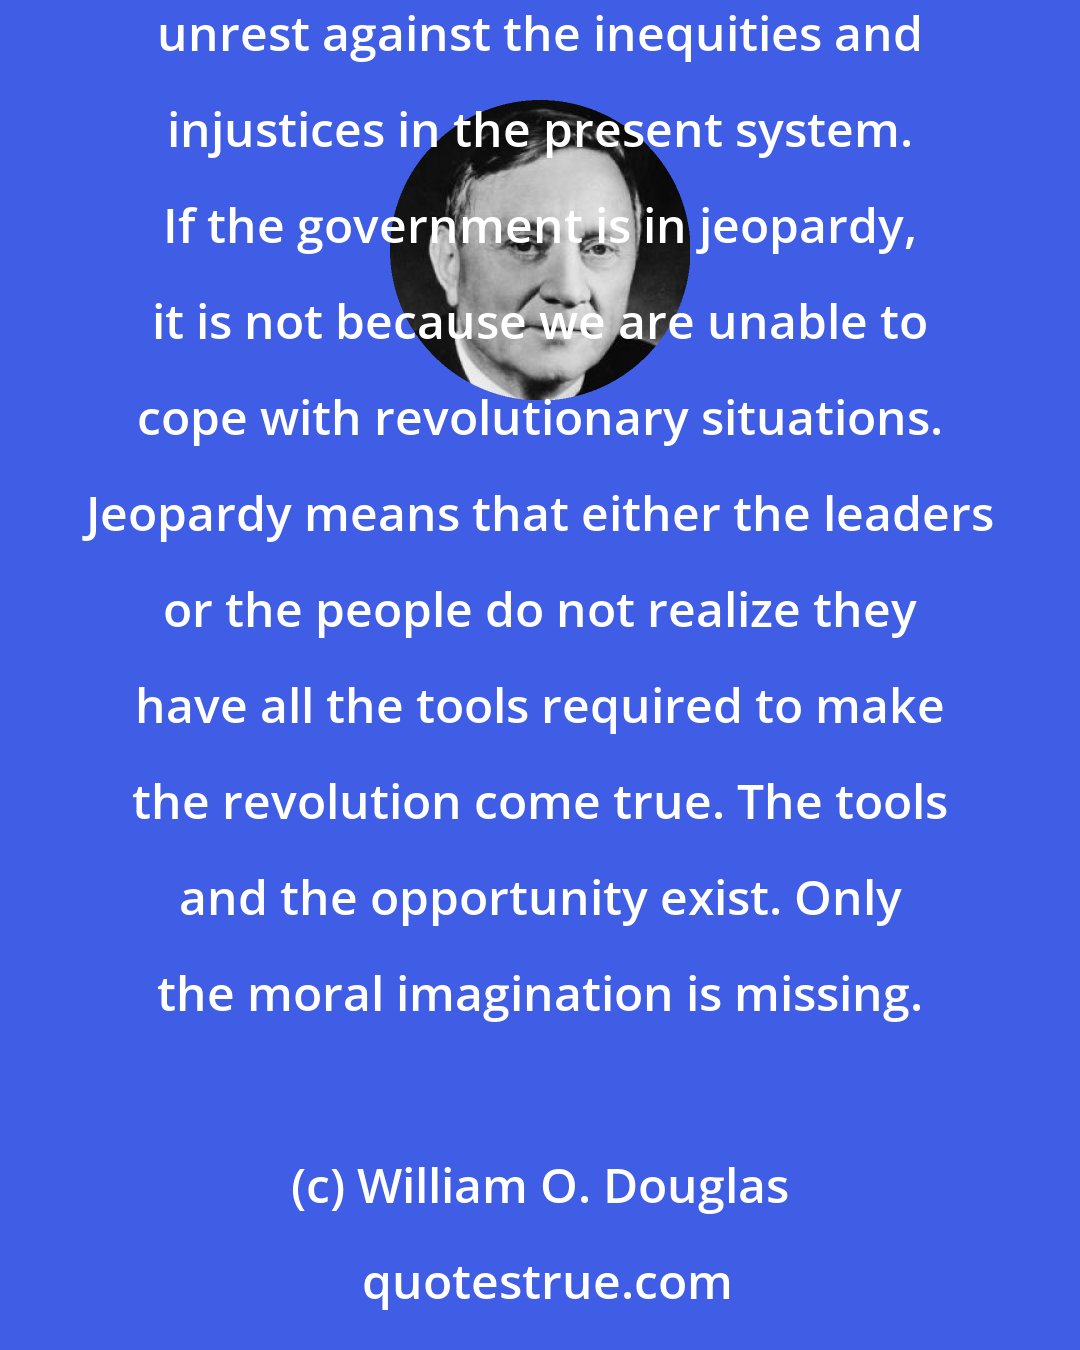 William O. Douglas: Realization of this need means adults must awaken to the urgency of the young people's unrest-in other words there must be created an adult unrest against the inequities and injustices in the present system. If the government is in jeopardy, it is not because we are unable to cope with revolutionary situations. Jeopardy means that either the leaders or the people do not realize they have all the tools required to make the revolution come true. The tools and the opportunity exist. Only the moral imagination is missing.